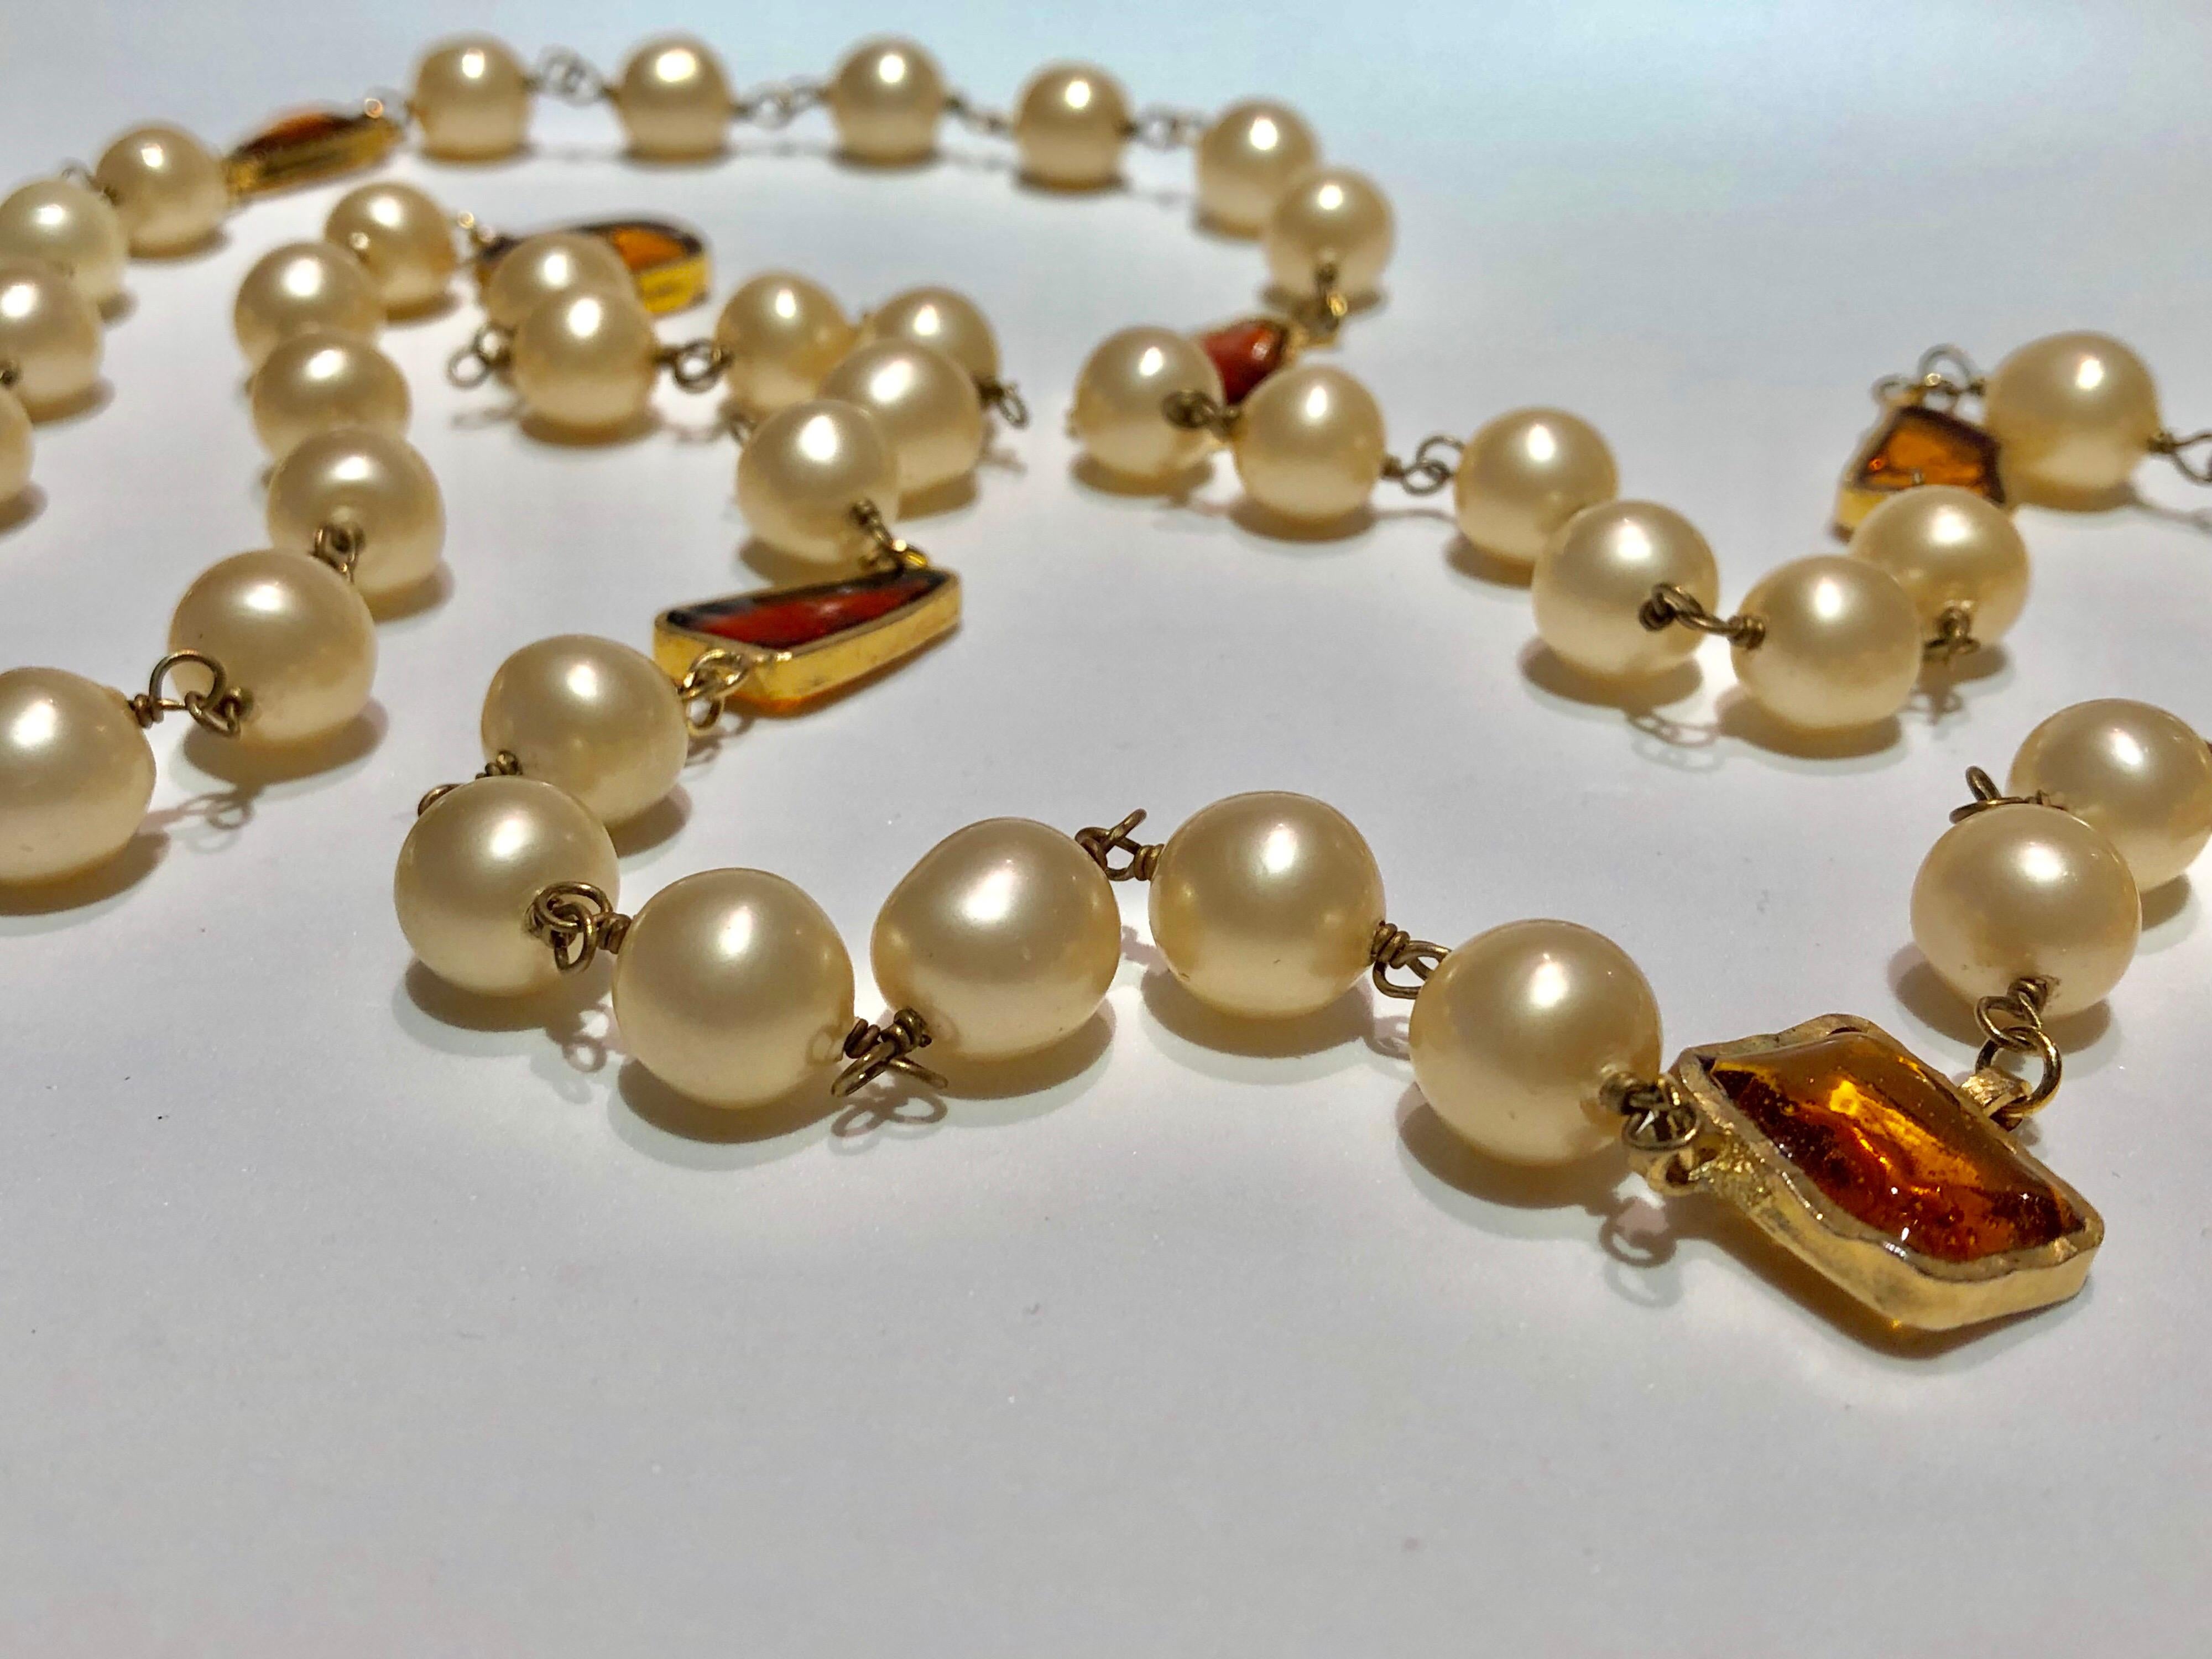 Scarce vintage Coco Chanel 1994 fall/winter cream pearl necklace - this important classic/contemporary Chanel necklace is comprised out of large cream colored faux glass pearls. In all Coco manner, the necklace is accented by large architectural